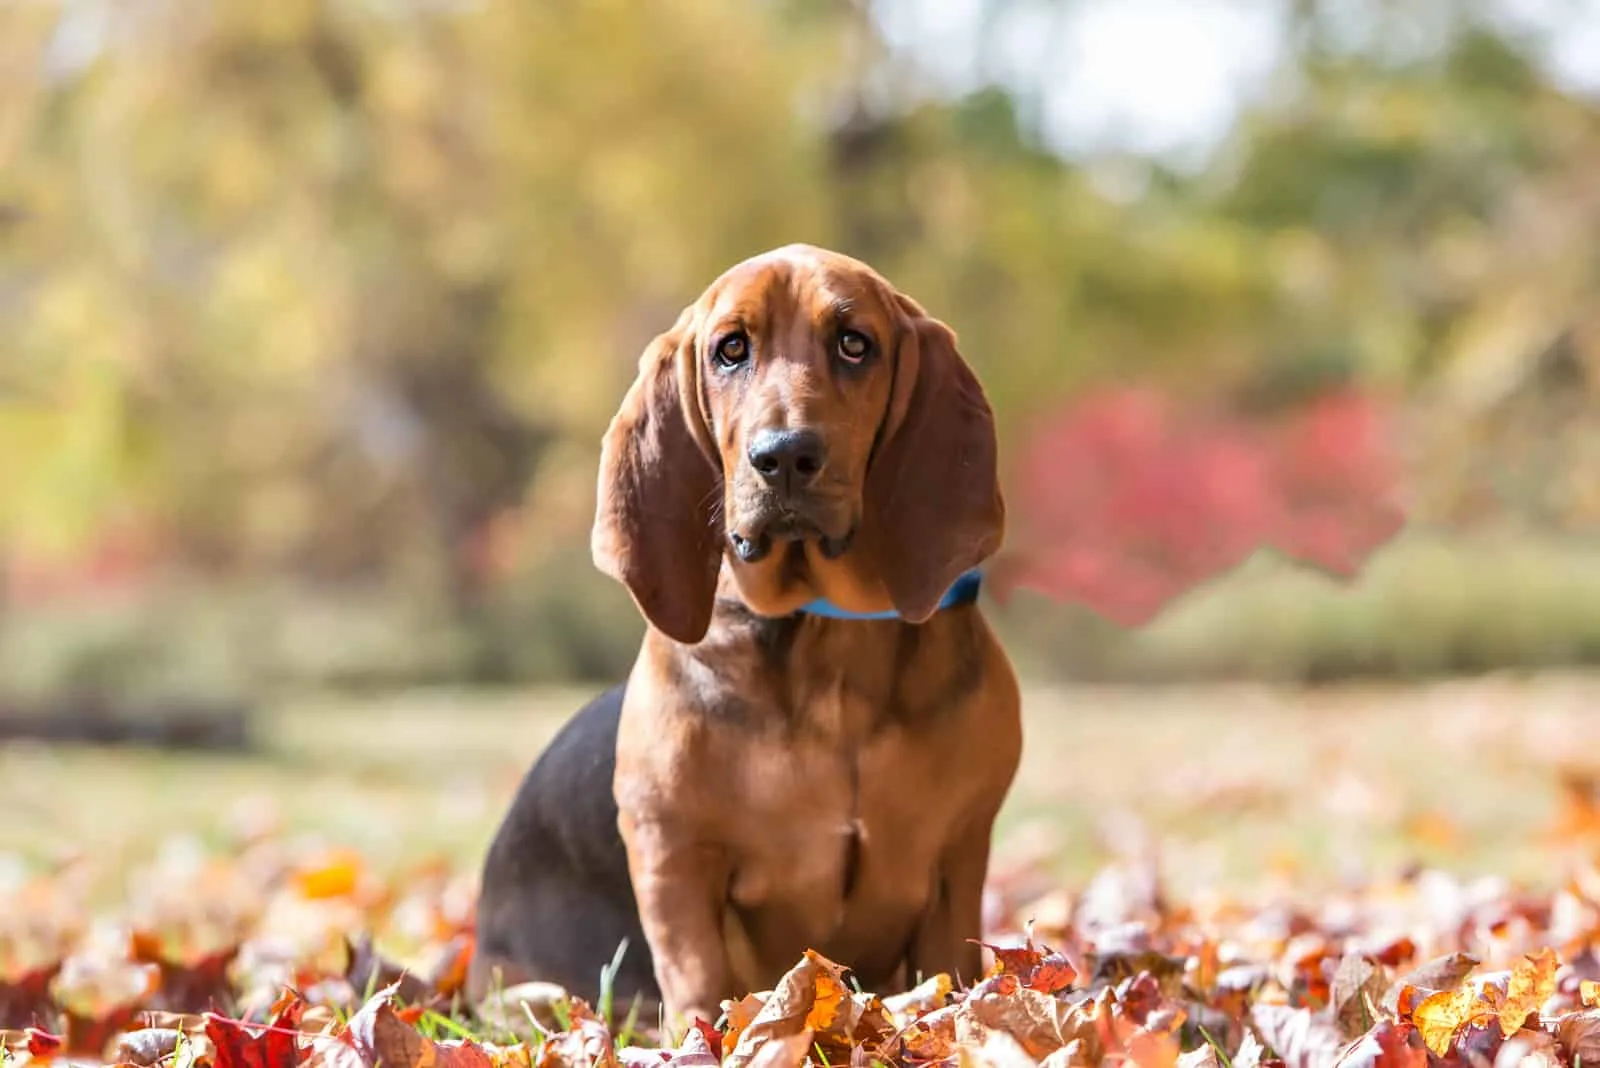 Basset Hound standing on the leaves in park